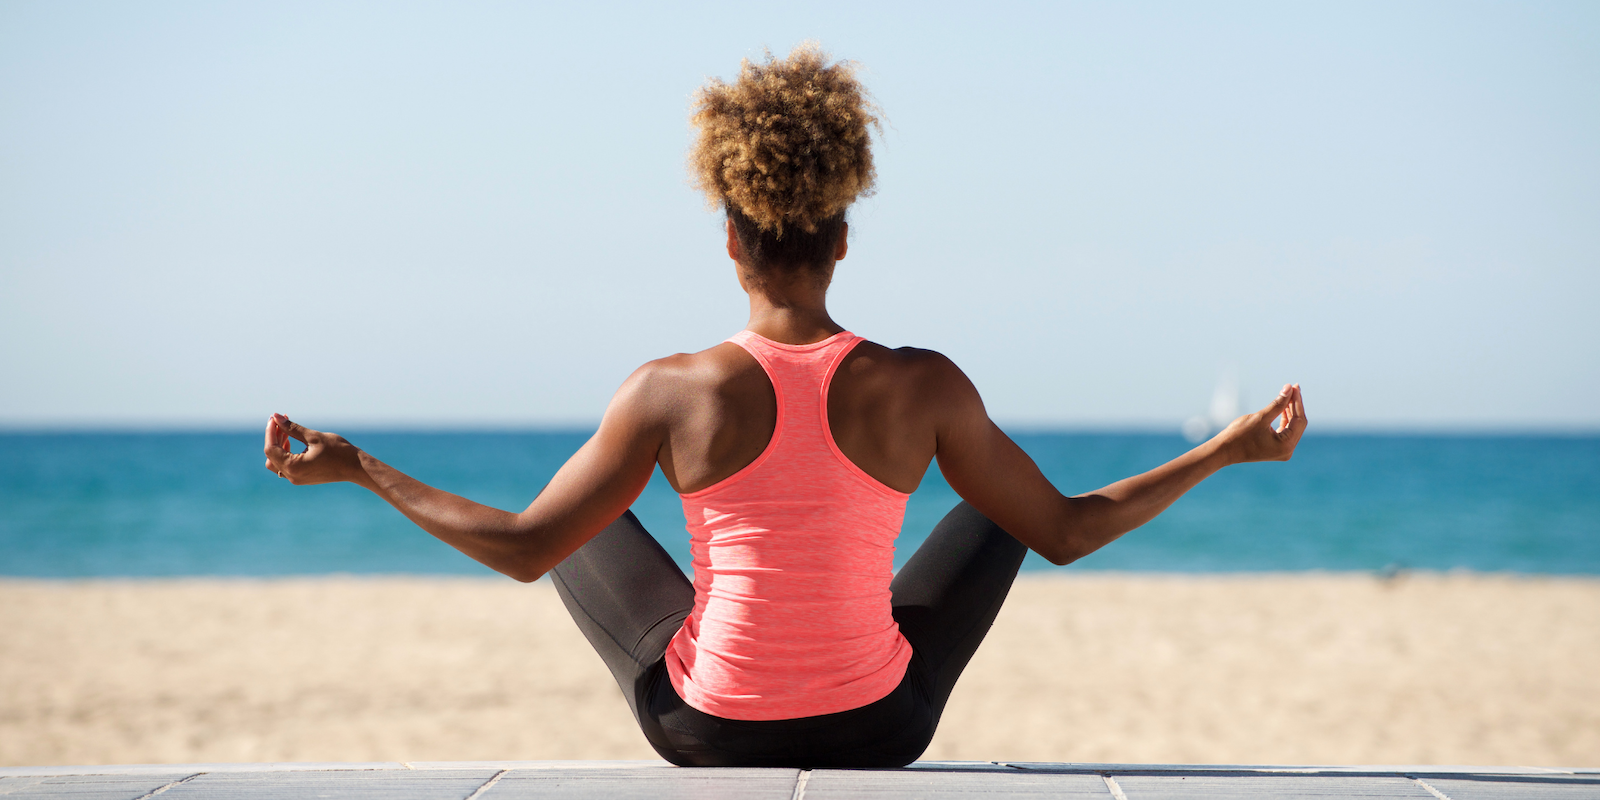 A Black woman sits on a beach in lotus pose, their body turned away from the camera. They're wearing a pink workout top and their hair is pulled into a bun.